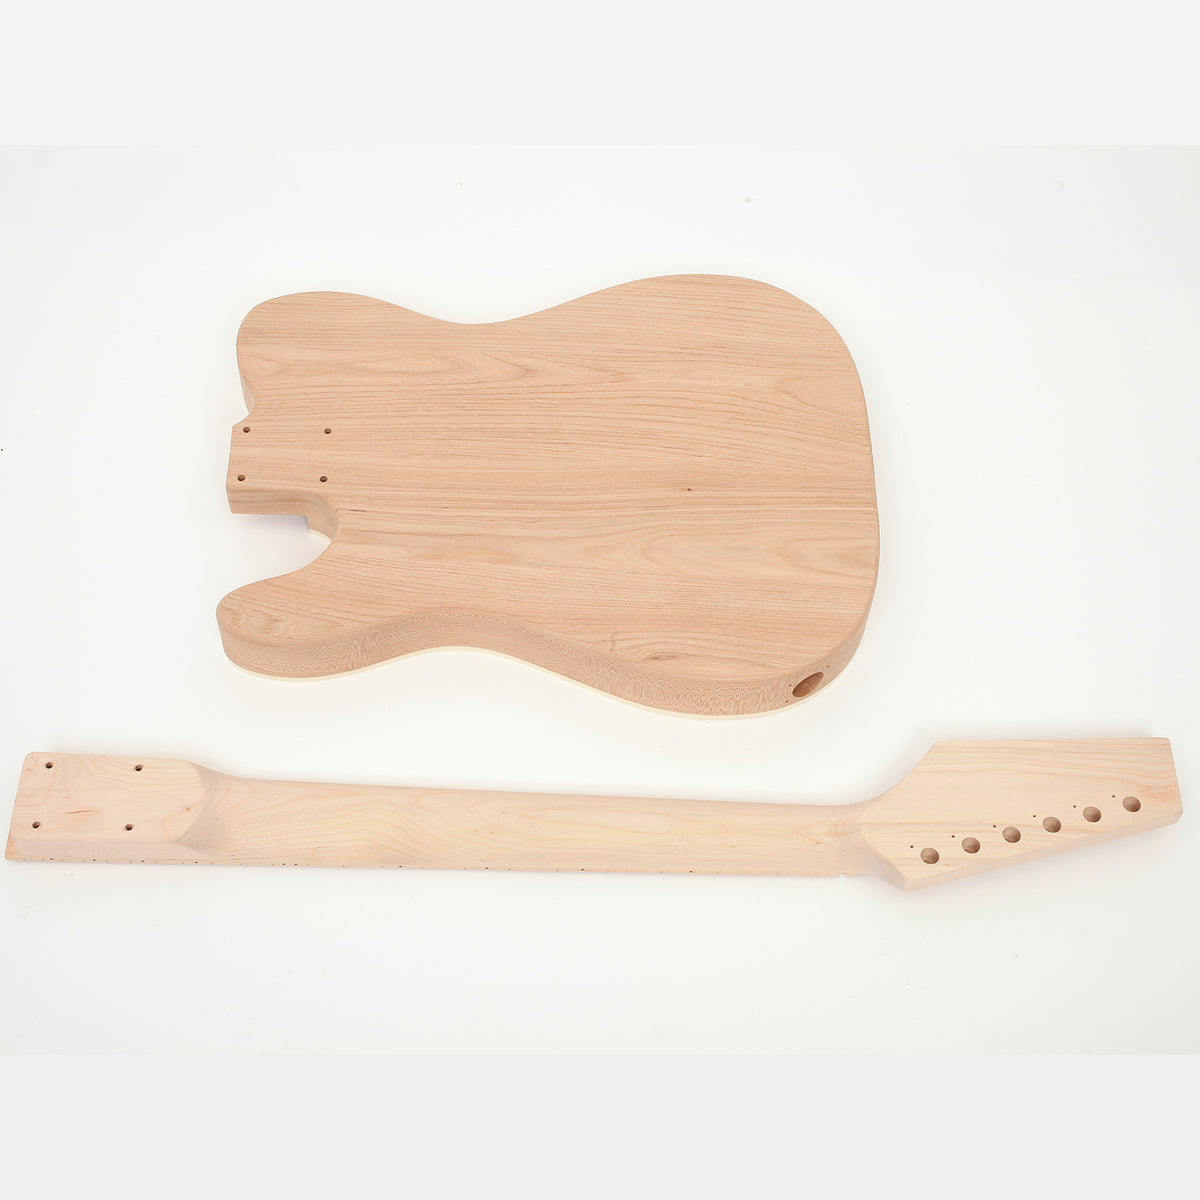 Thinline Tele DIY Guitar Kit Body and Neck Back